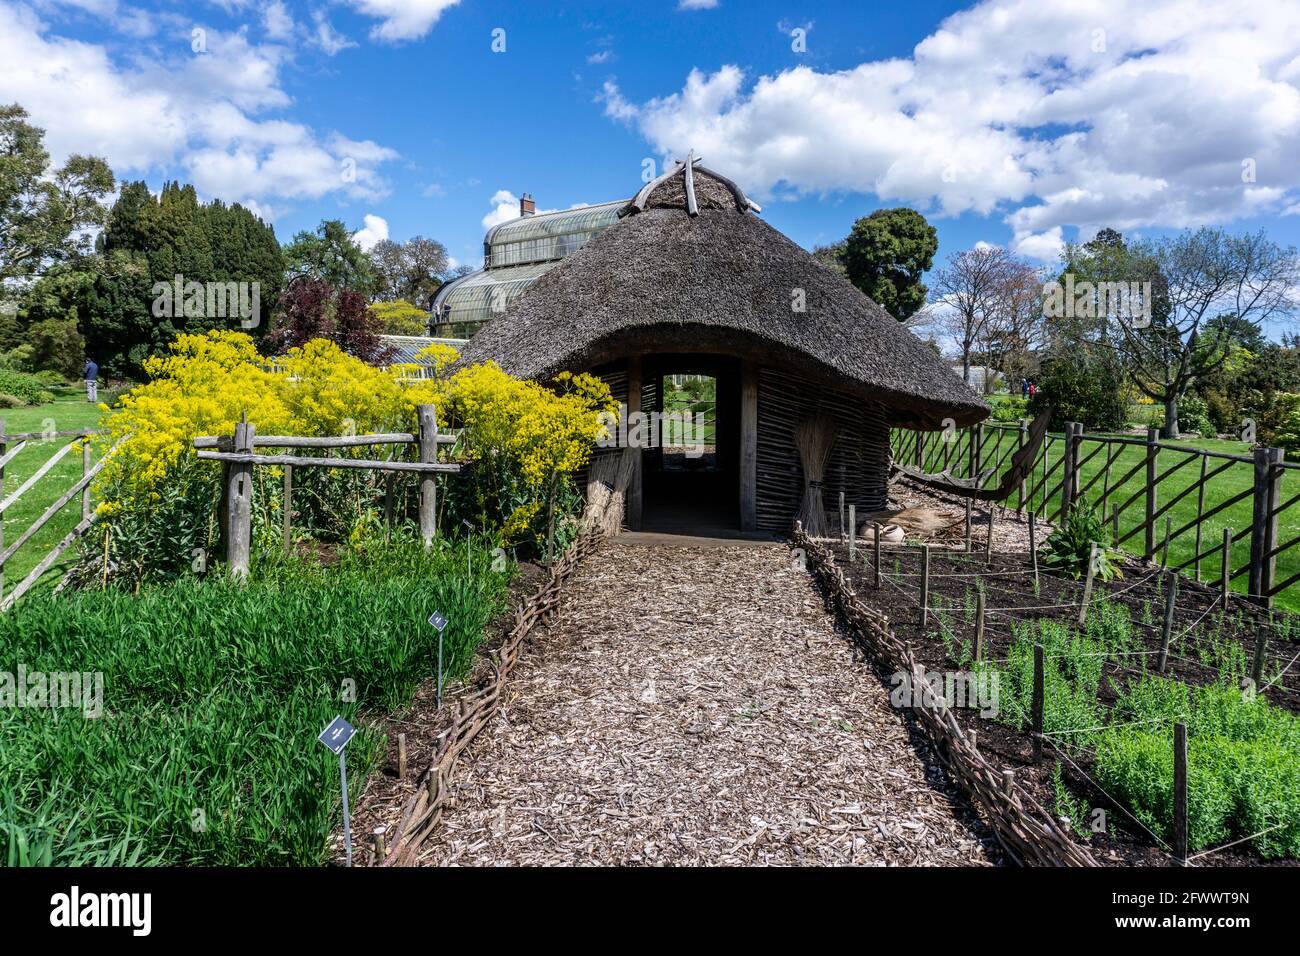 A replica Viking House in the Botanic Gardens in Dublin Ireland. It is a replica of a house excavated in Dublin in the 1980s. Stock Photo